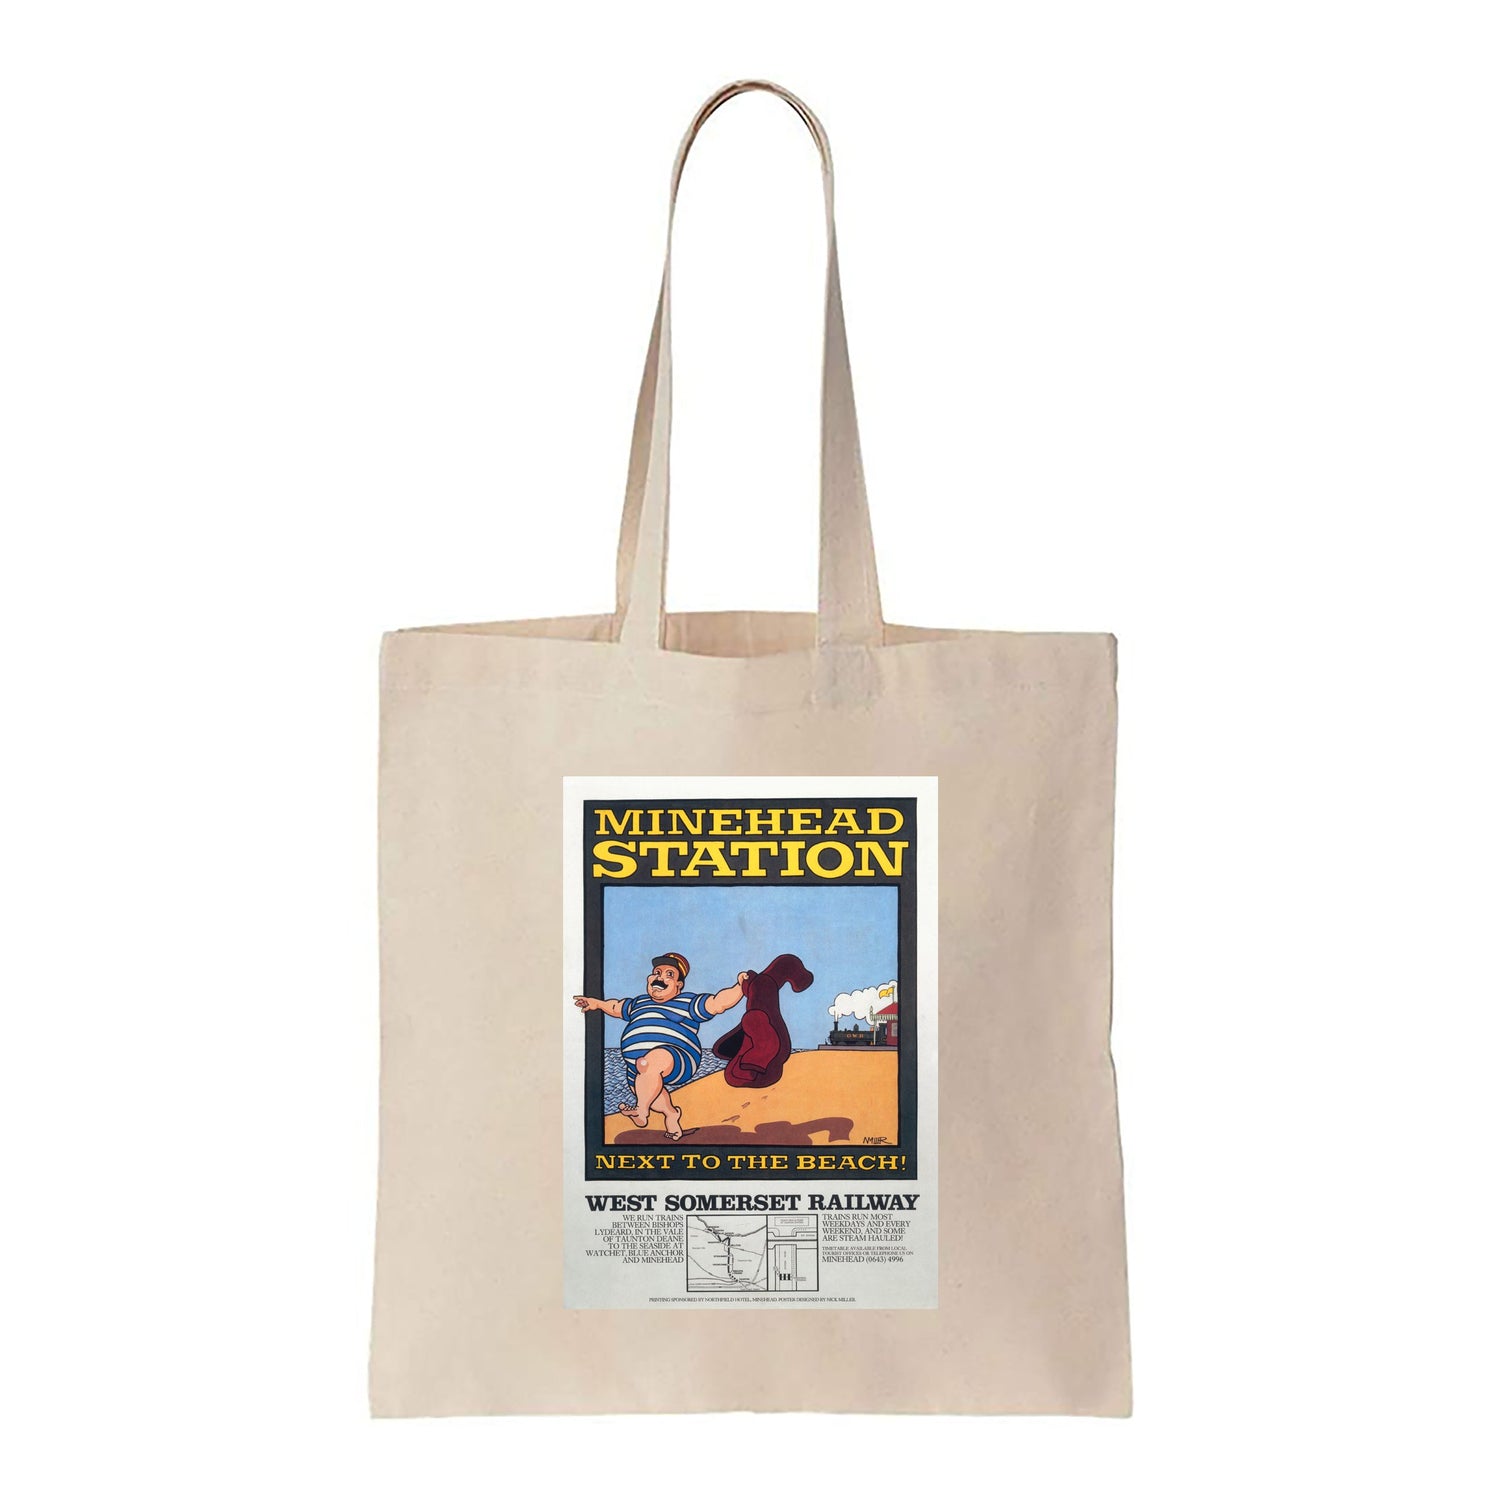 Minehead Station - Next to the Beach! - Canvas Tote Bag